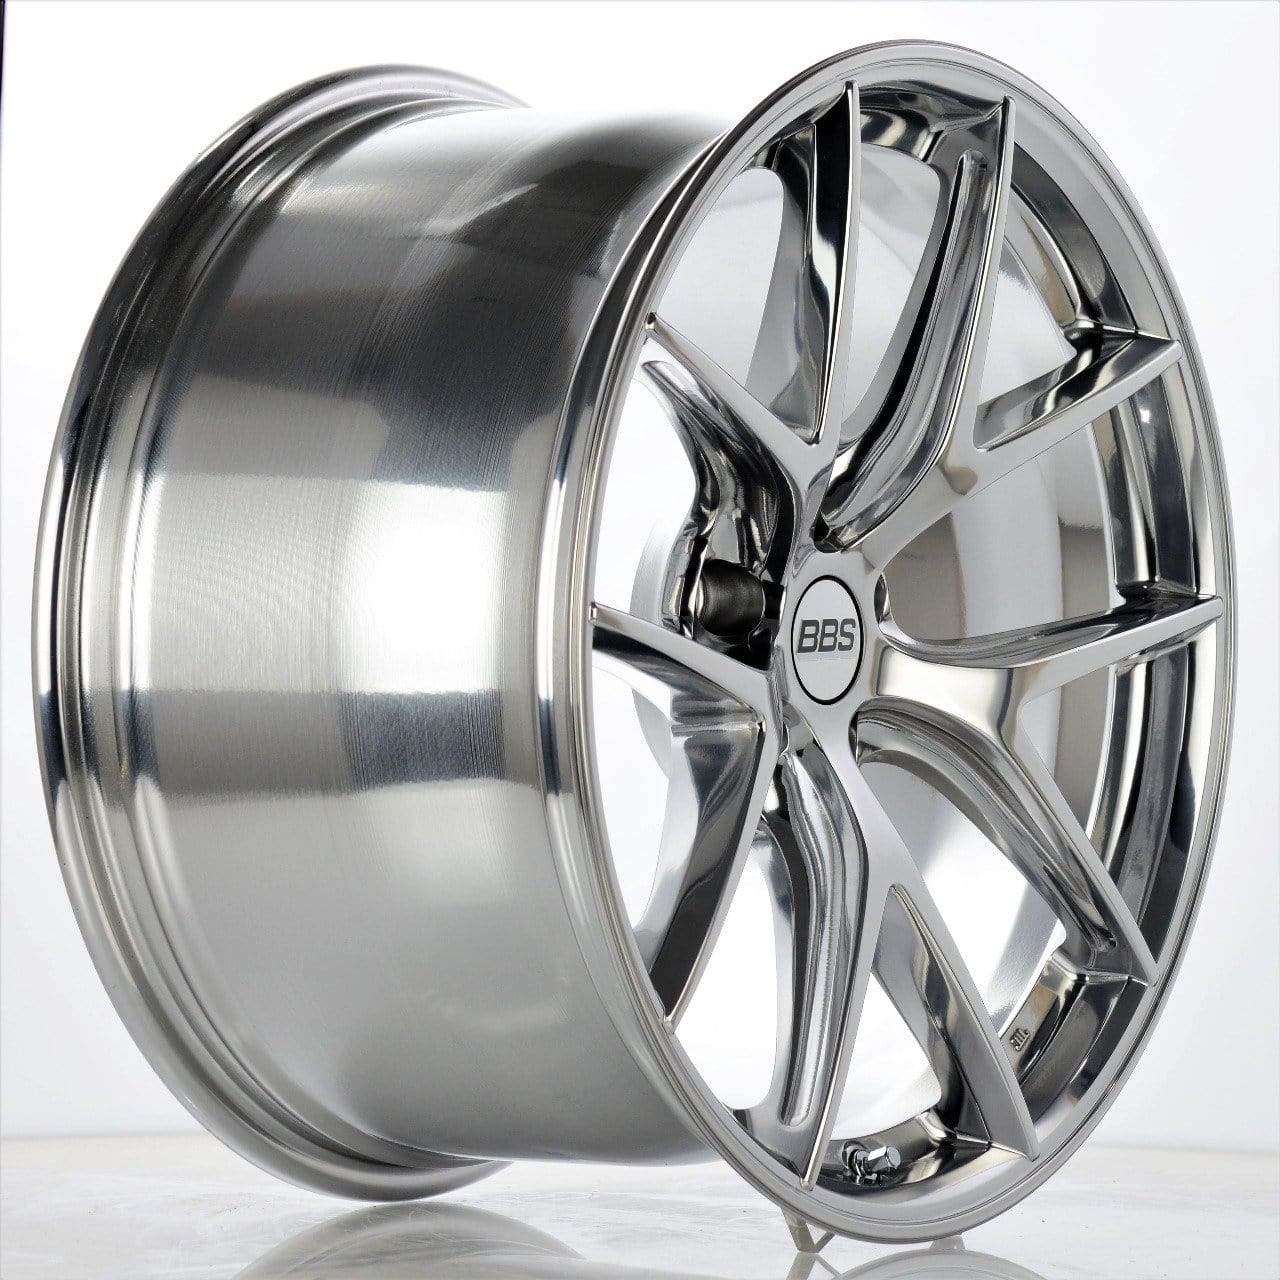 BBS CI-R Wheels in Ceramic Polish finish for C8 Corvette [50-4-015] - Lightweight, durable, and TÜV certified performance upgrade